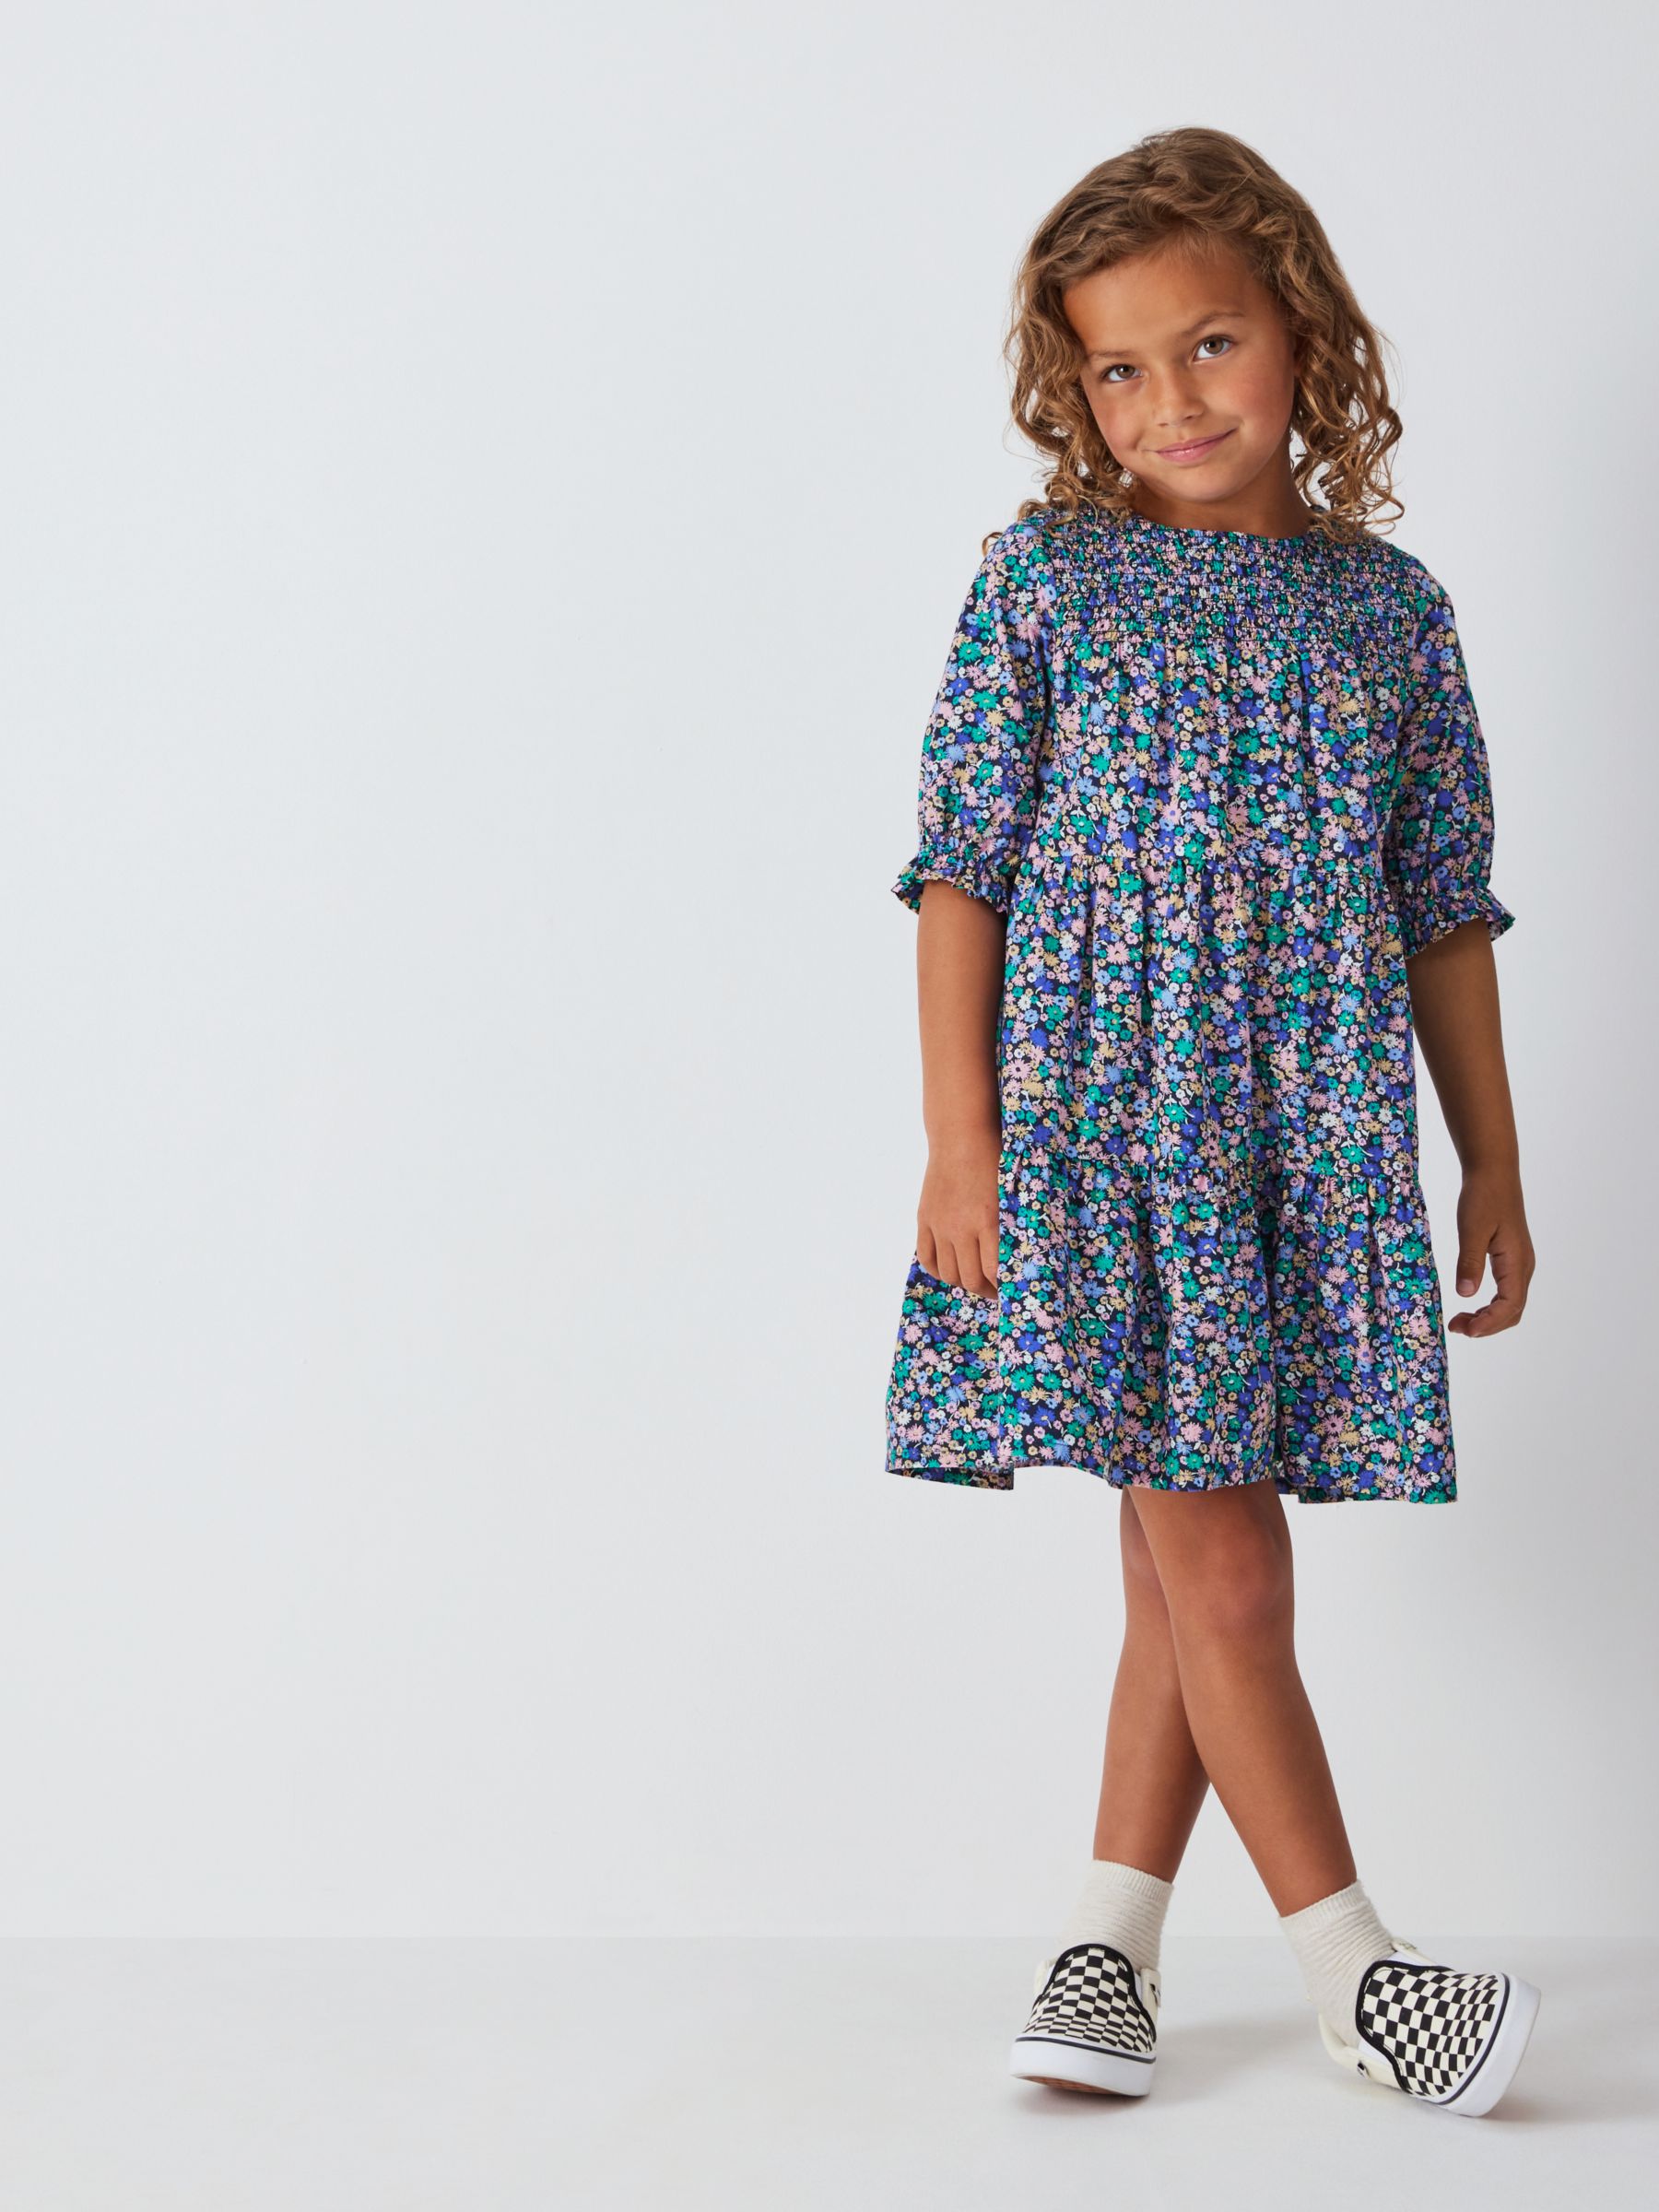 John Lewis Kids' Floral Tiered Dress, Outer Space, 9 years